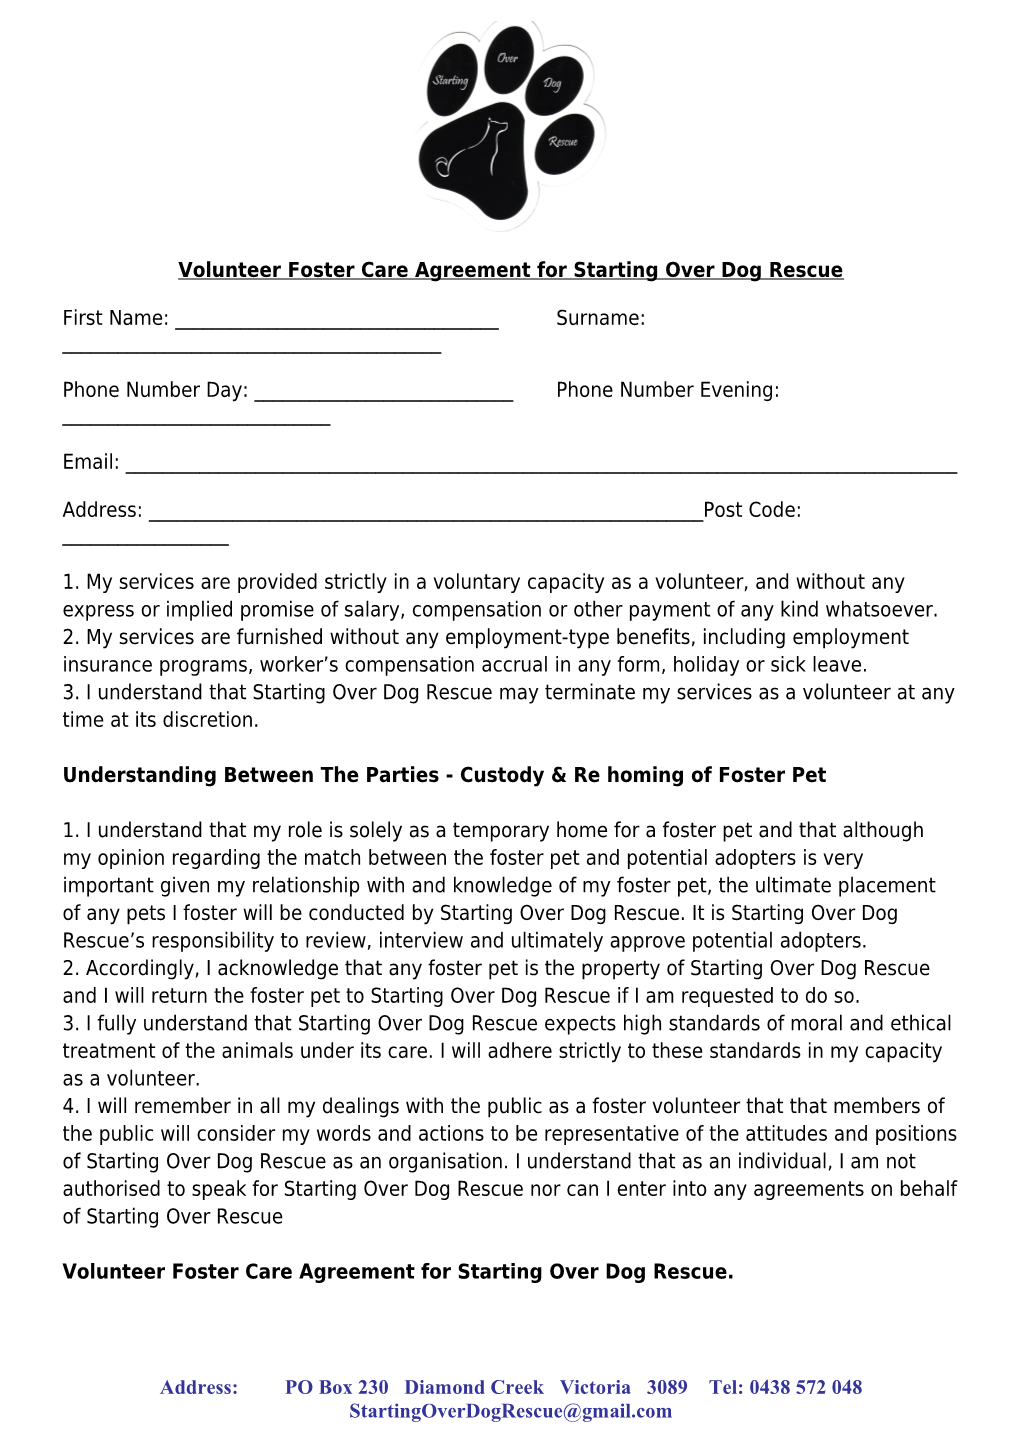 Volunteer Foster Care Agreement for Starting Over Dog Rescue